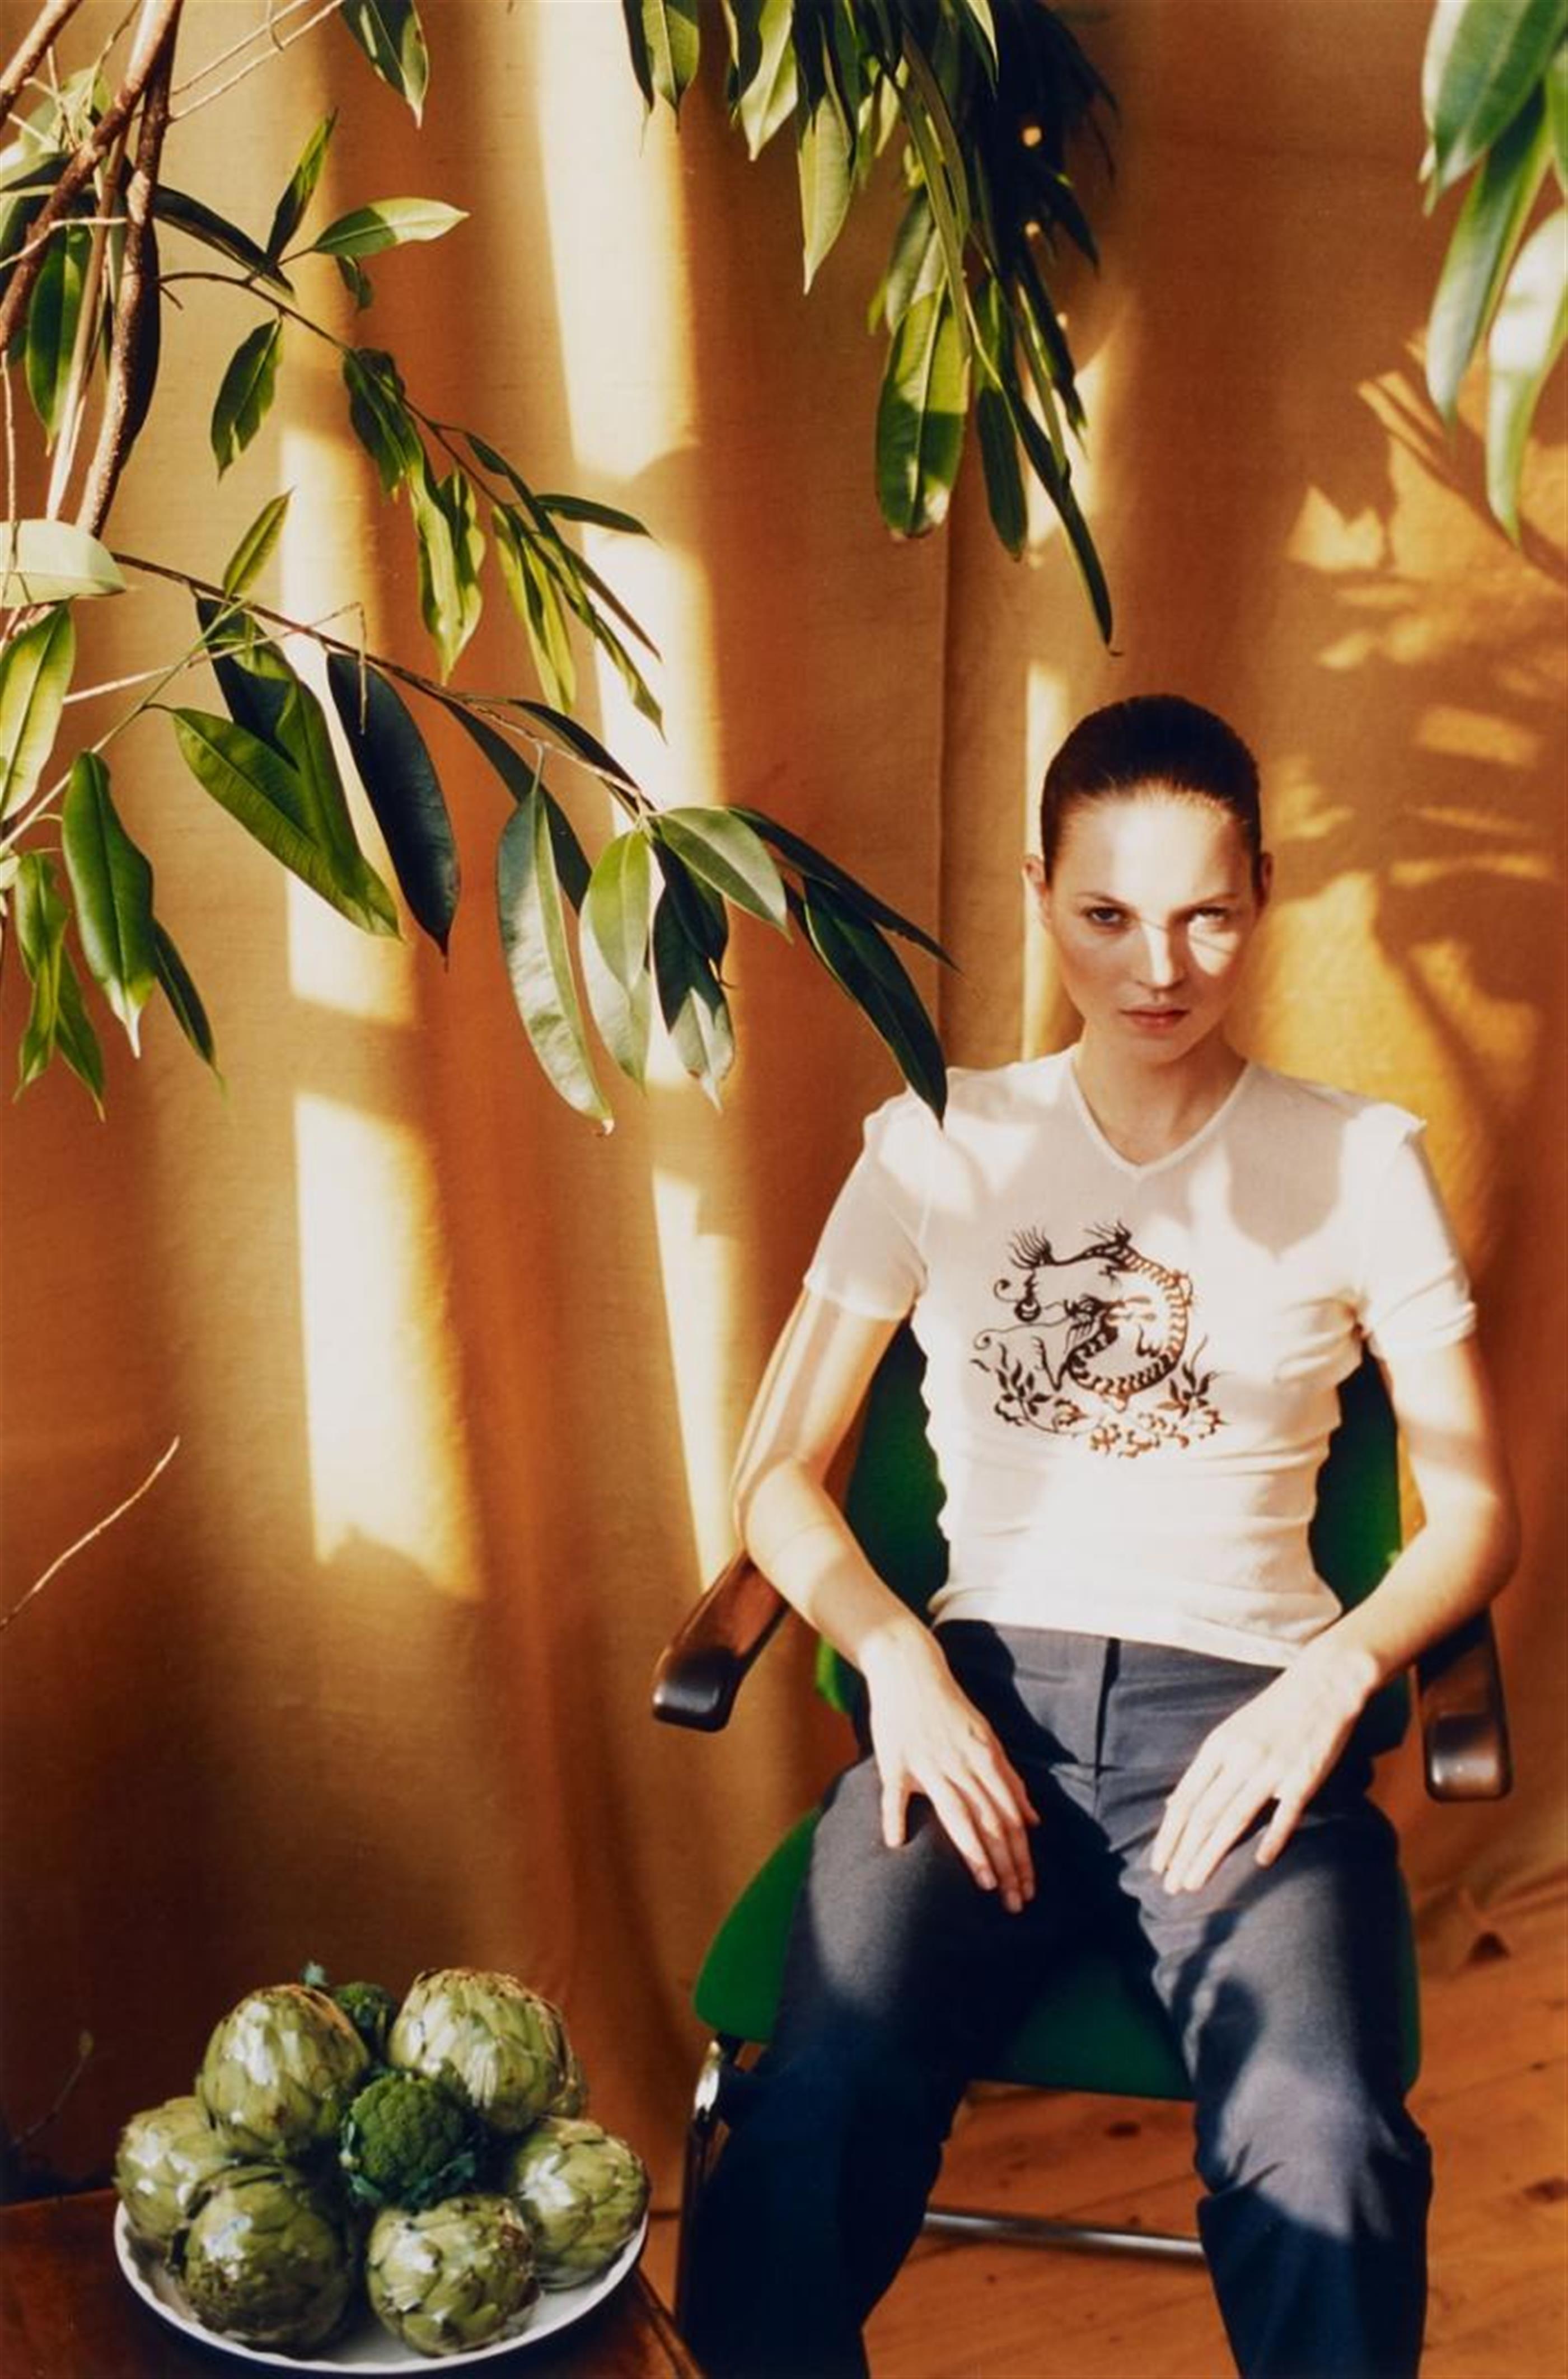 Wolfgang Tillmans - Kate with tree - image-1